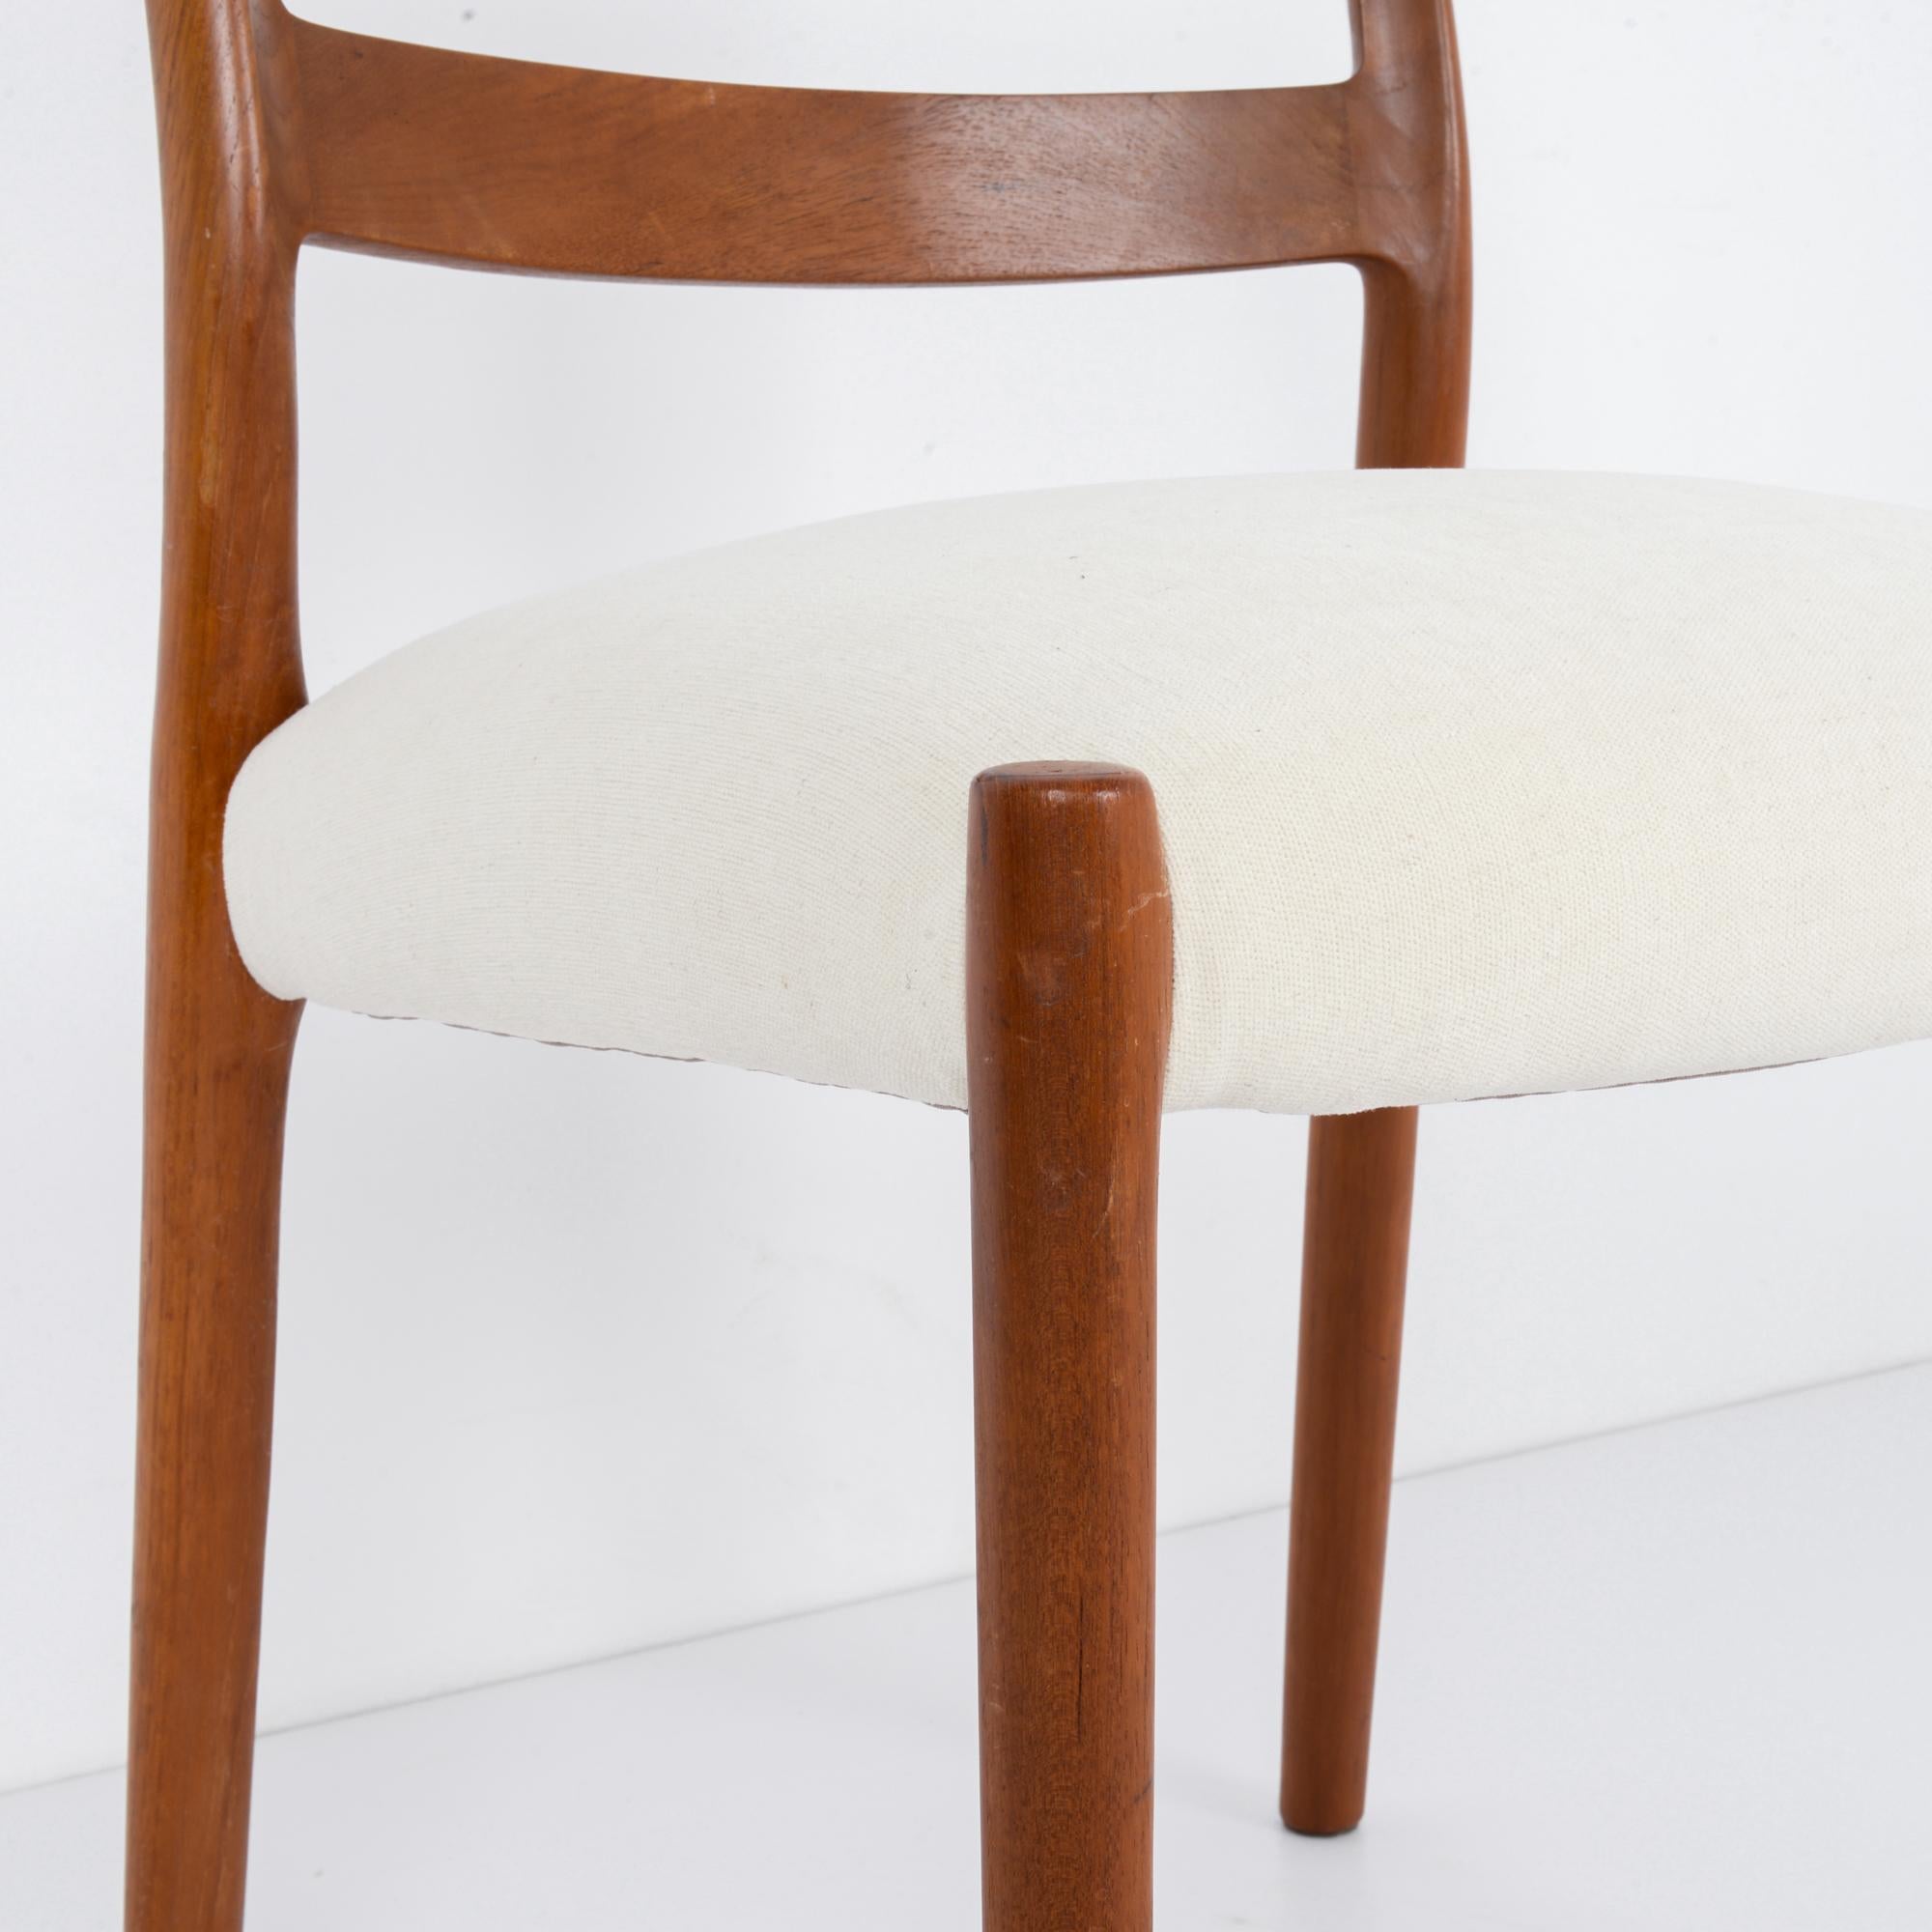 1960s Danish Wooden Chair with Upholstered Seat For Sale 3